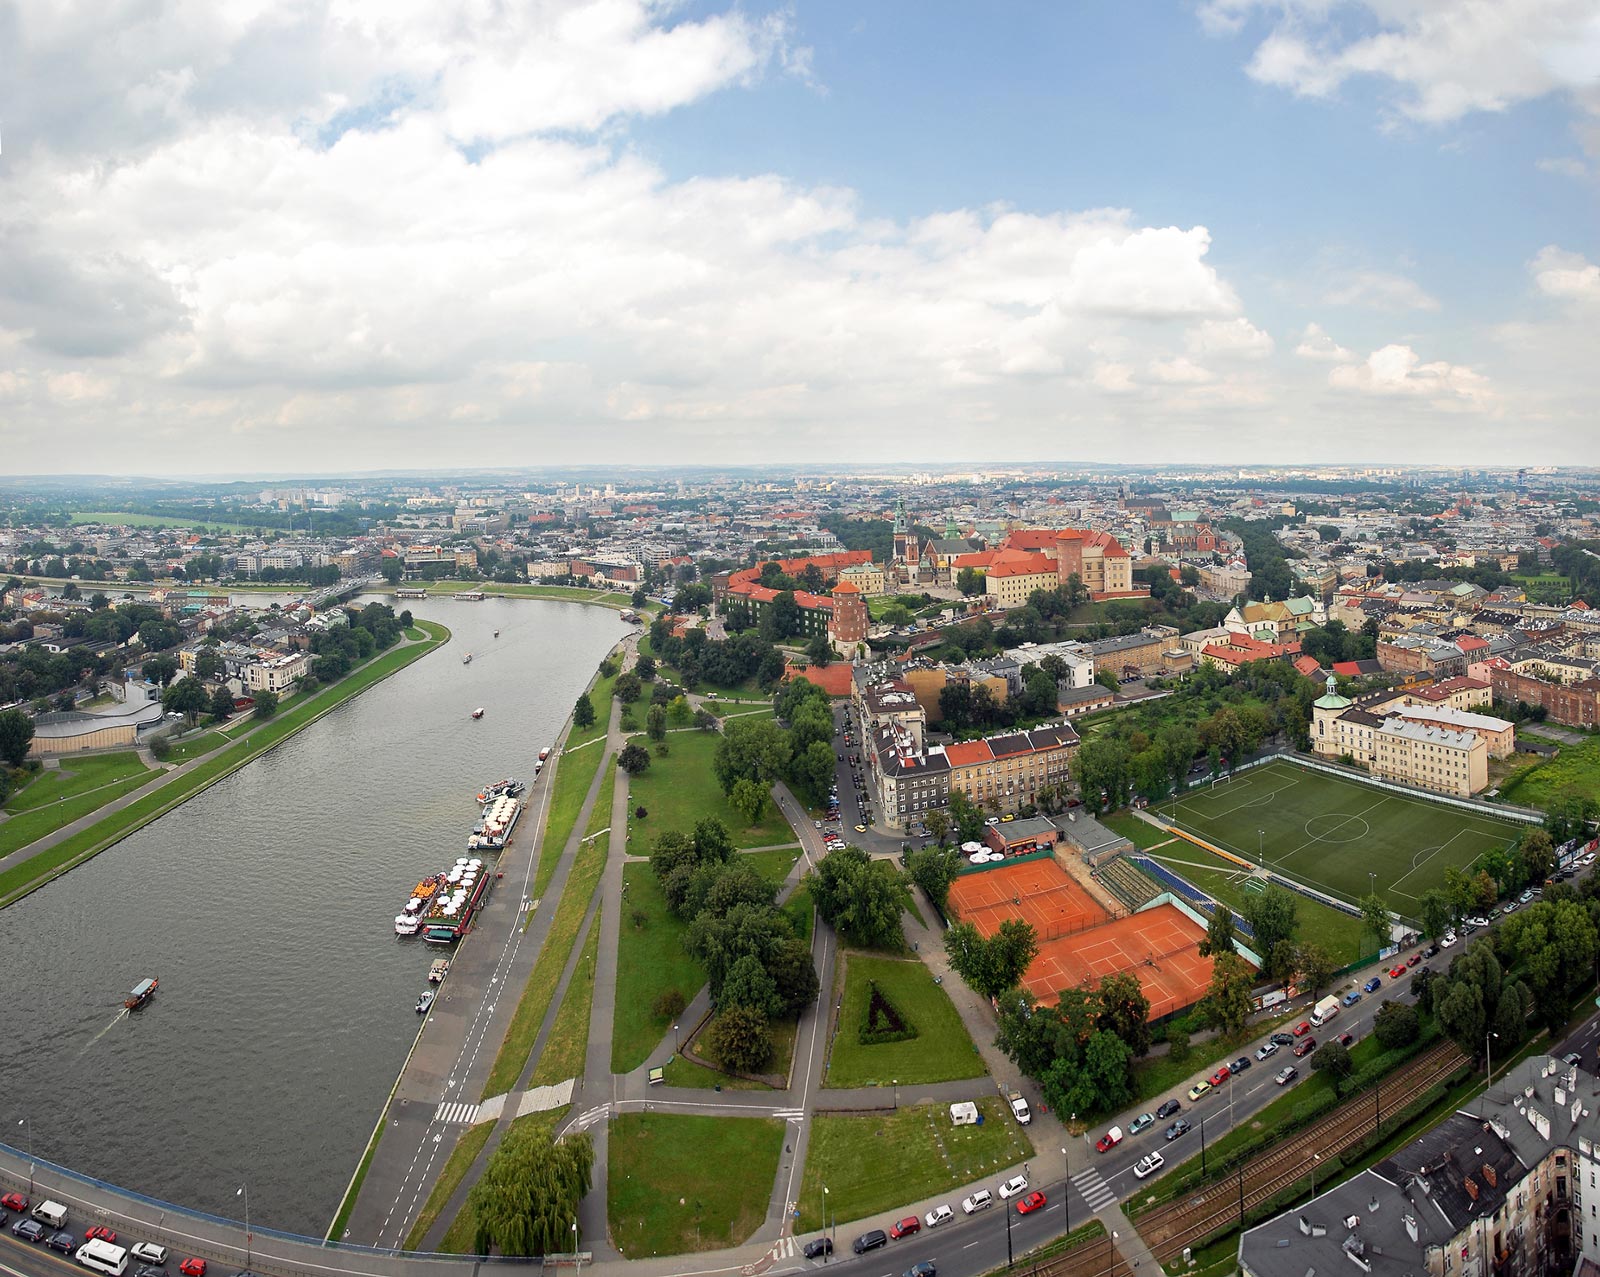 Panoramic view of Krakow city from flying baloon. Historical part in center of the image.